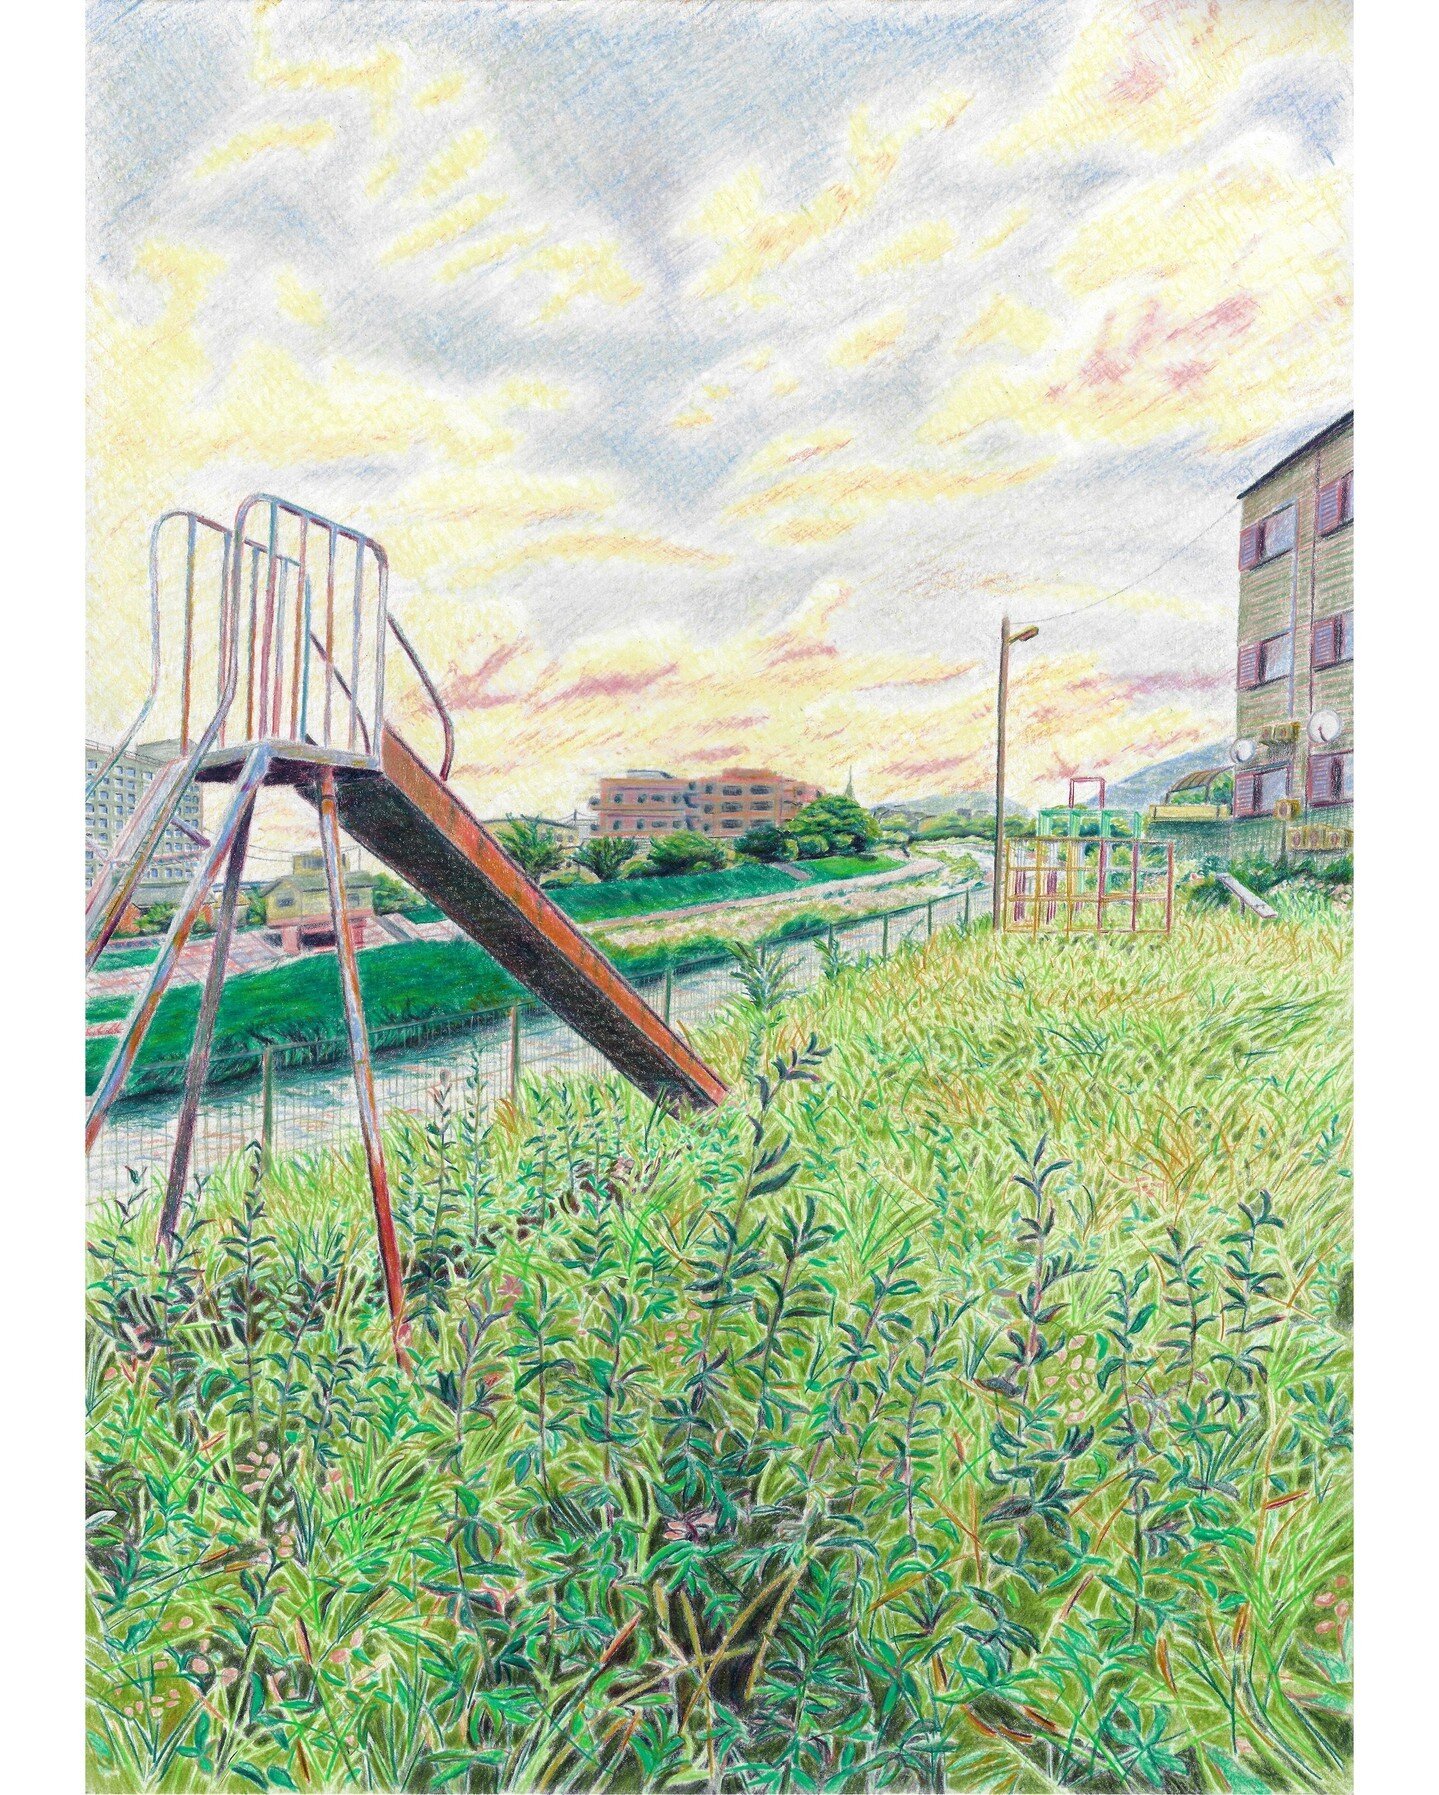 Last but not least, here is 'Japan 6' (45x63cm framed), the final one in this particular Japan triptych. The empty/overgrown playground might be in danger of being a bit contrived, but I don't think its supposed to be about 'youth lost' or anything l